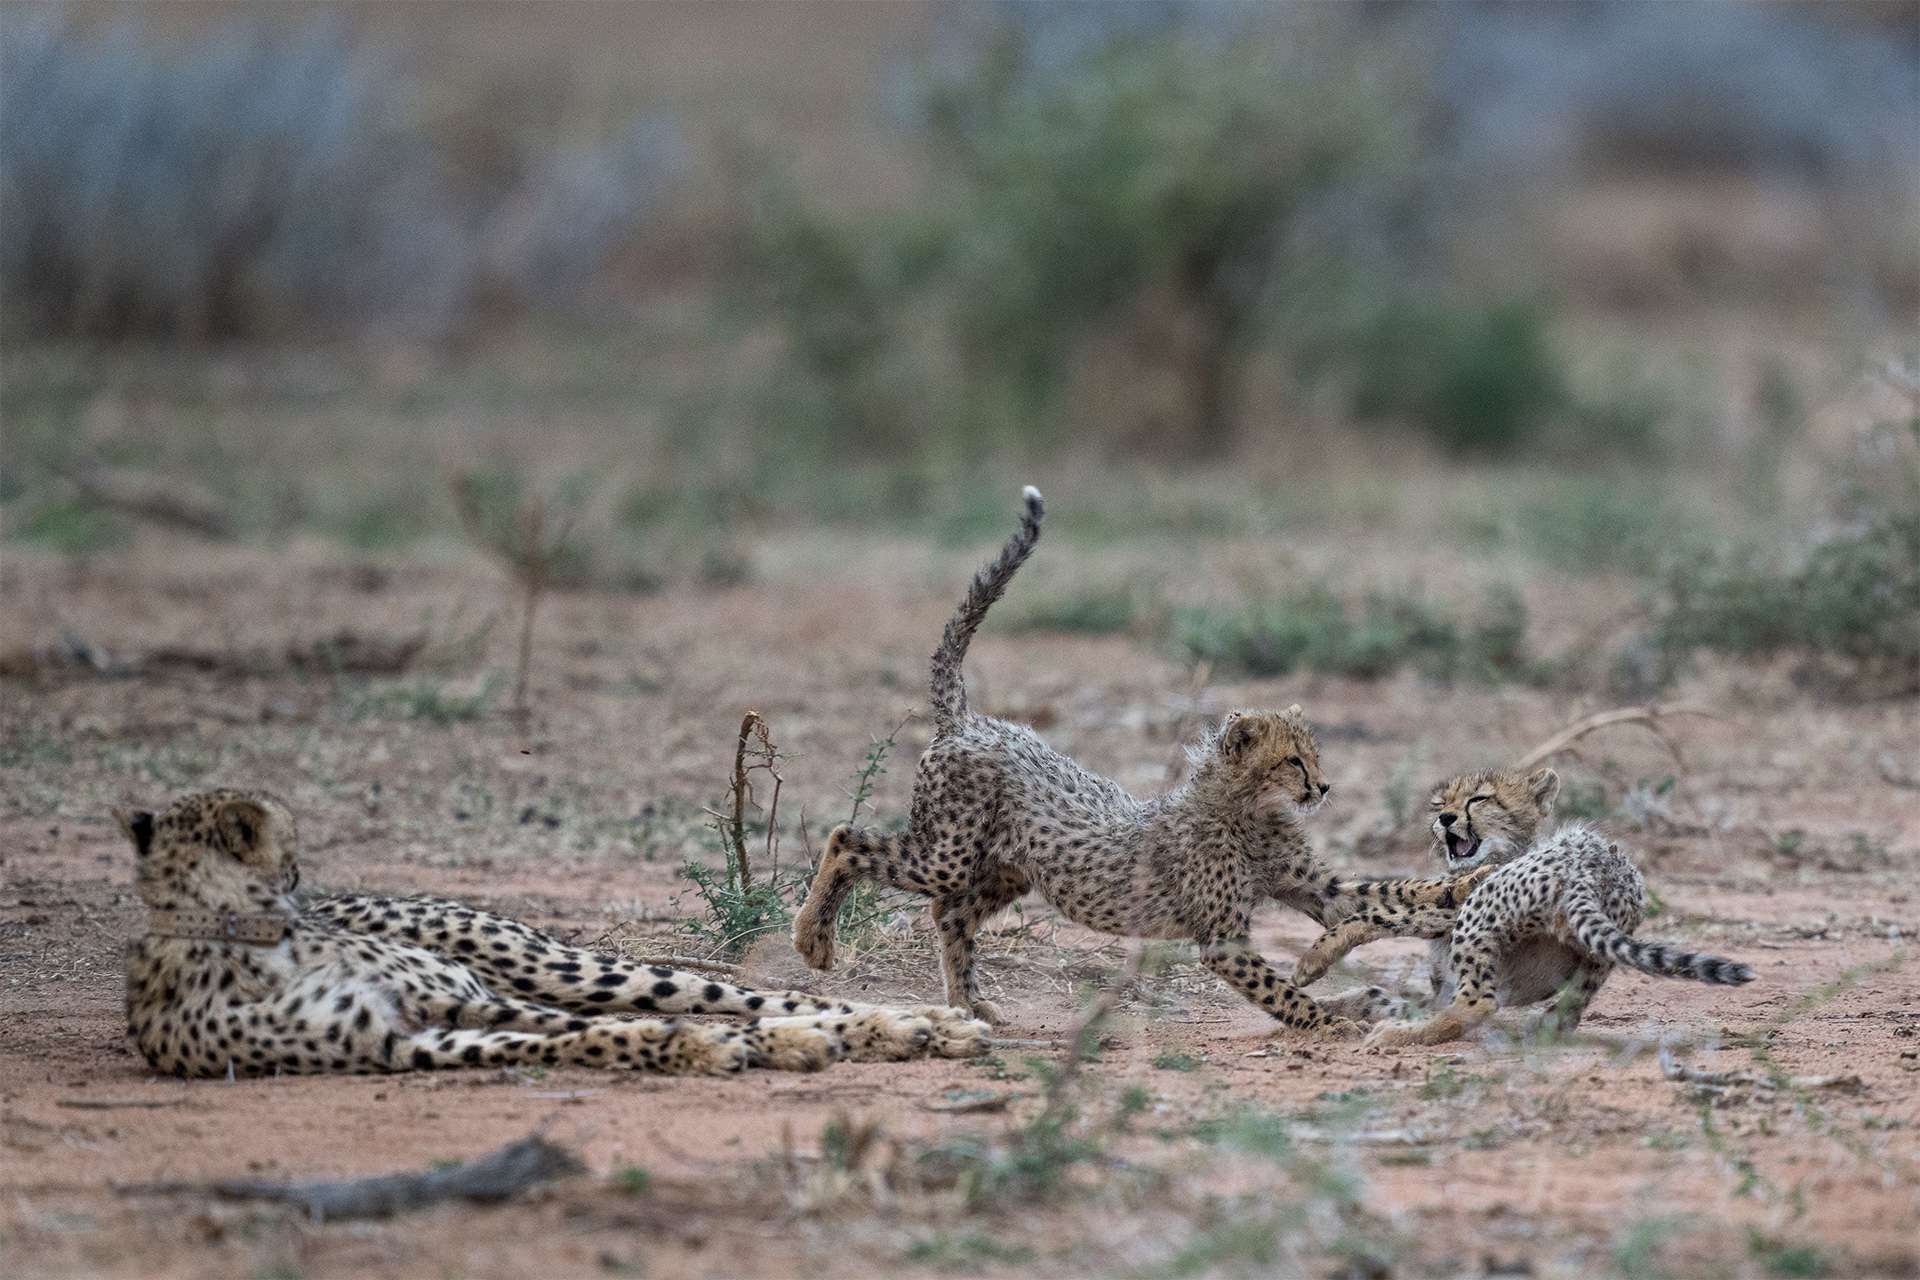 Cheetah cubs wrestle and play while their mother naps in the grasses africa savanna 